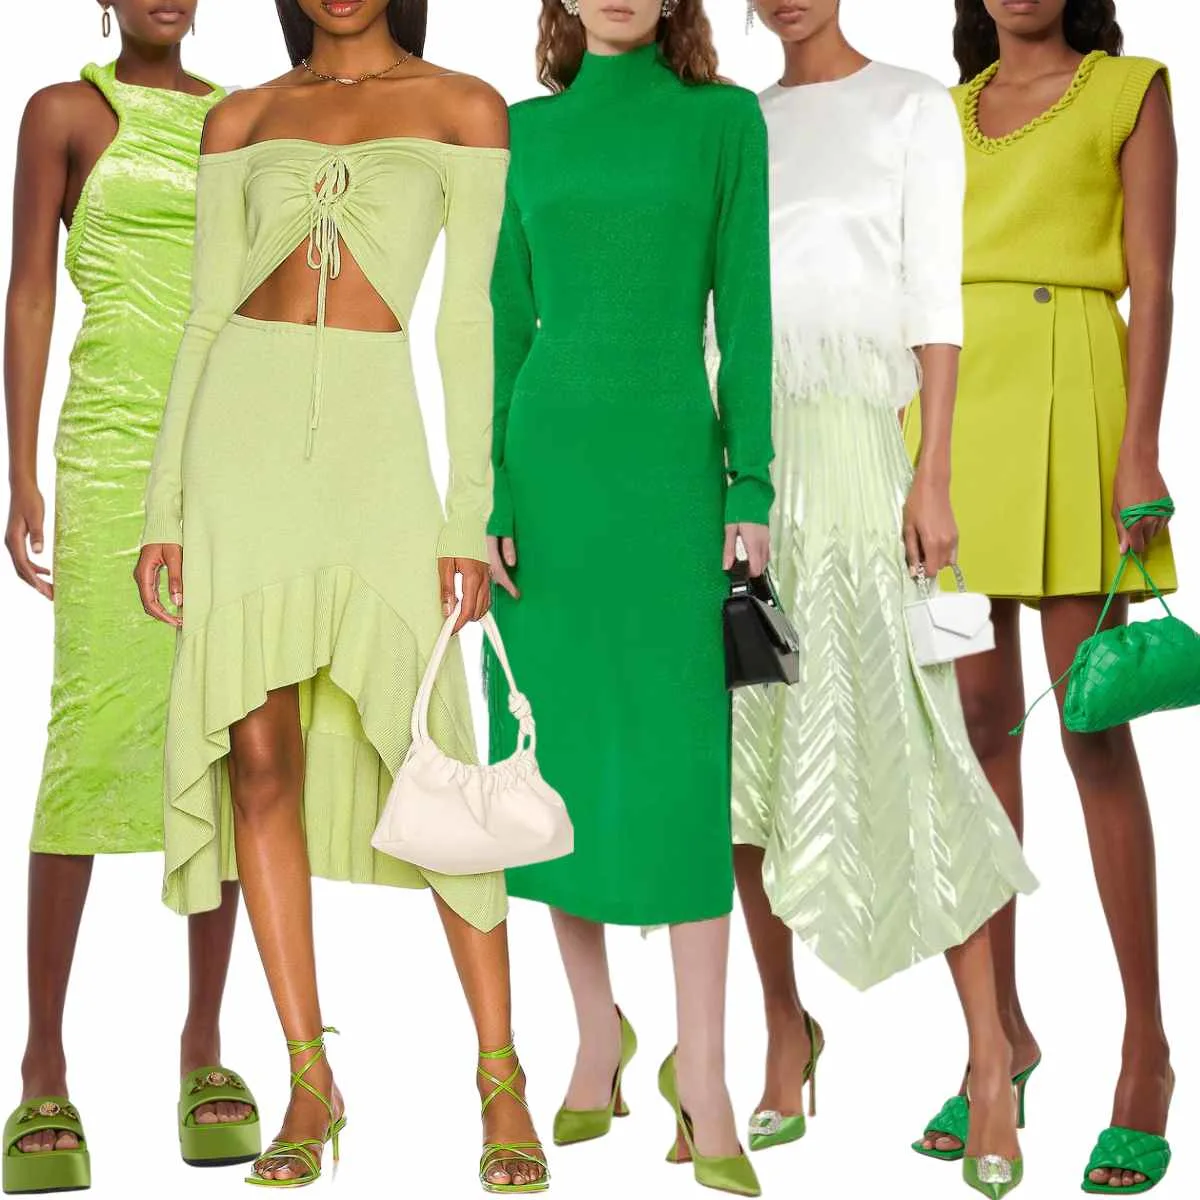 Collage of 5 women wearing different all green shoes outfits with